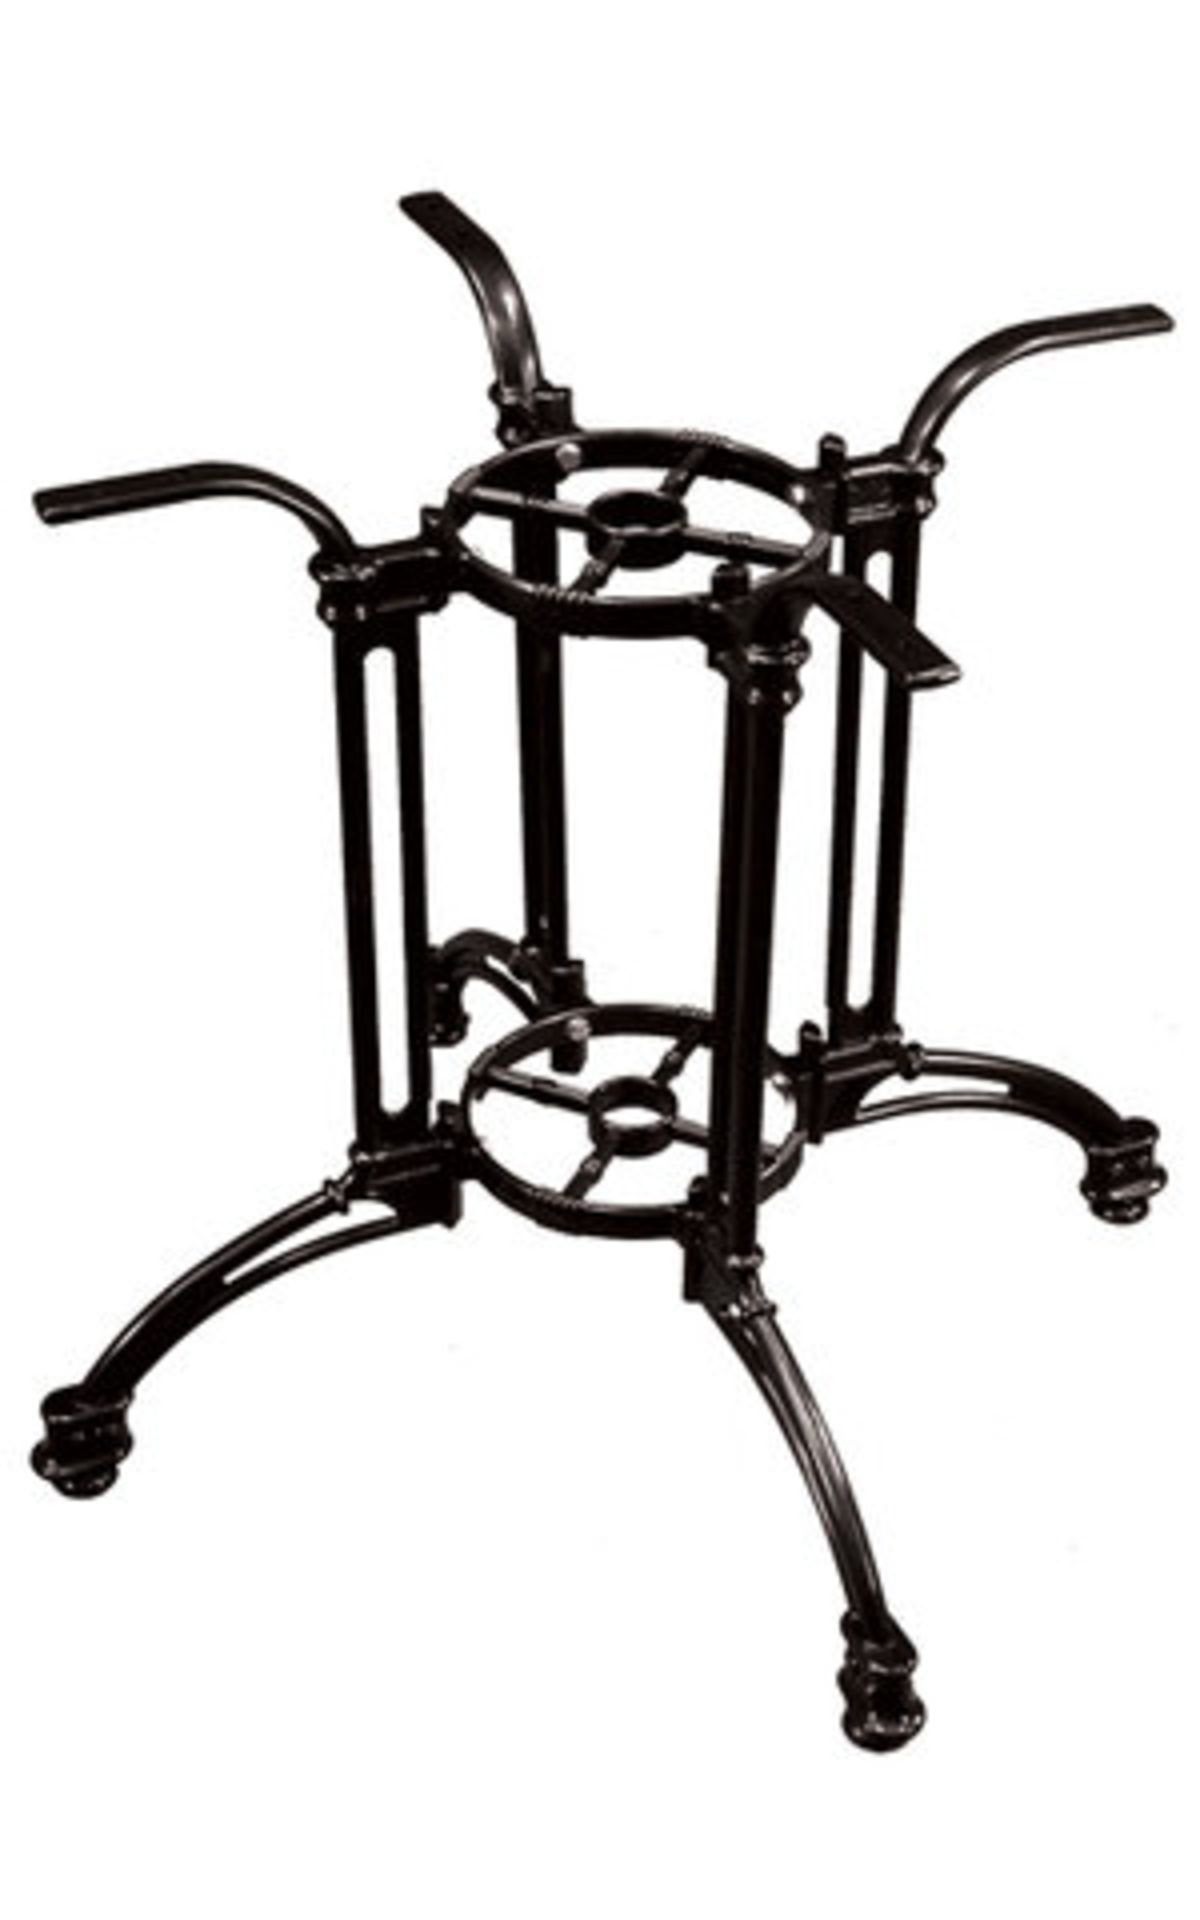 Andalusia 4 Large Base - TG32. Cast Aluminum/Epoxy Powder Coat. Dimensions: Max Table Top Size: